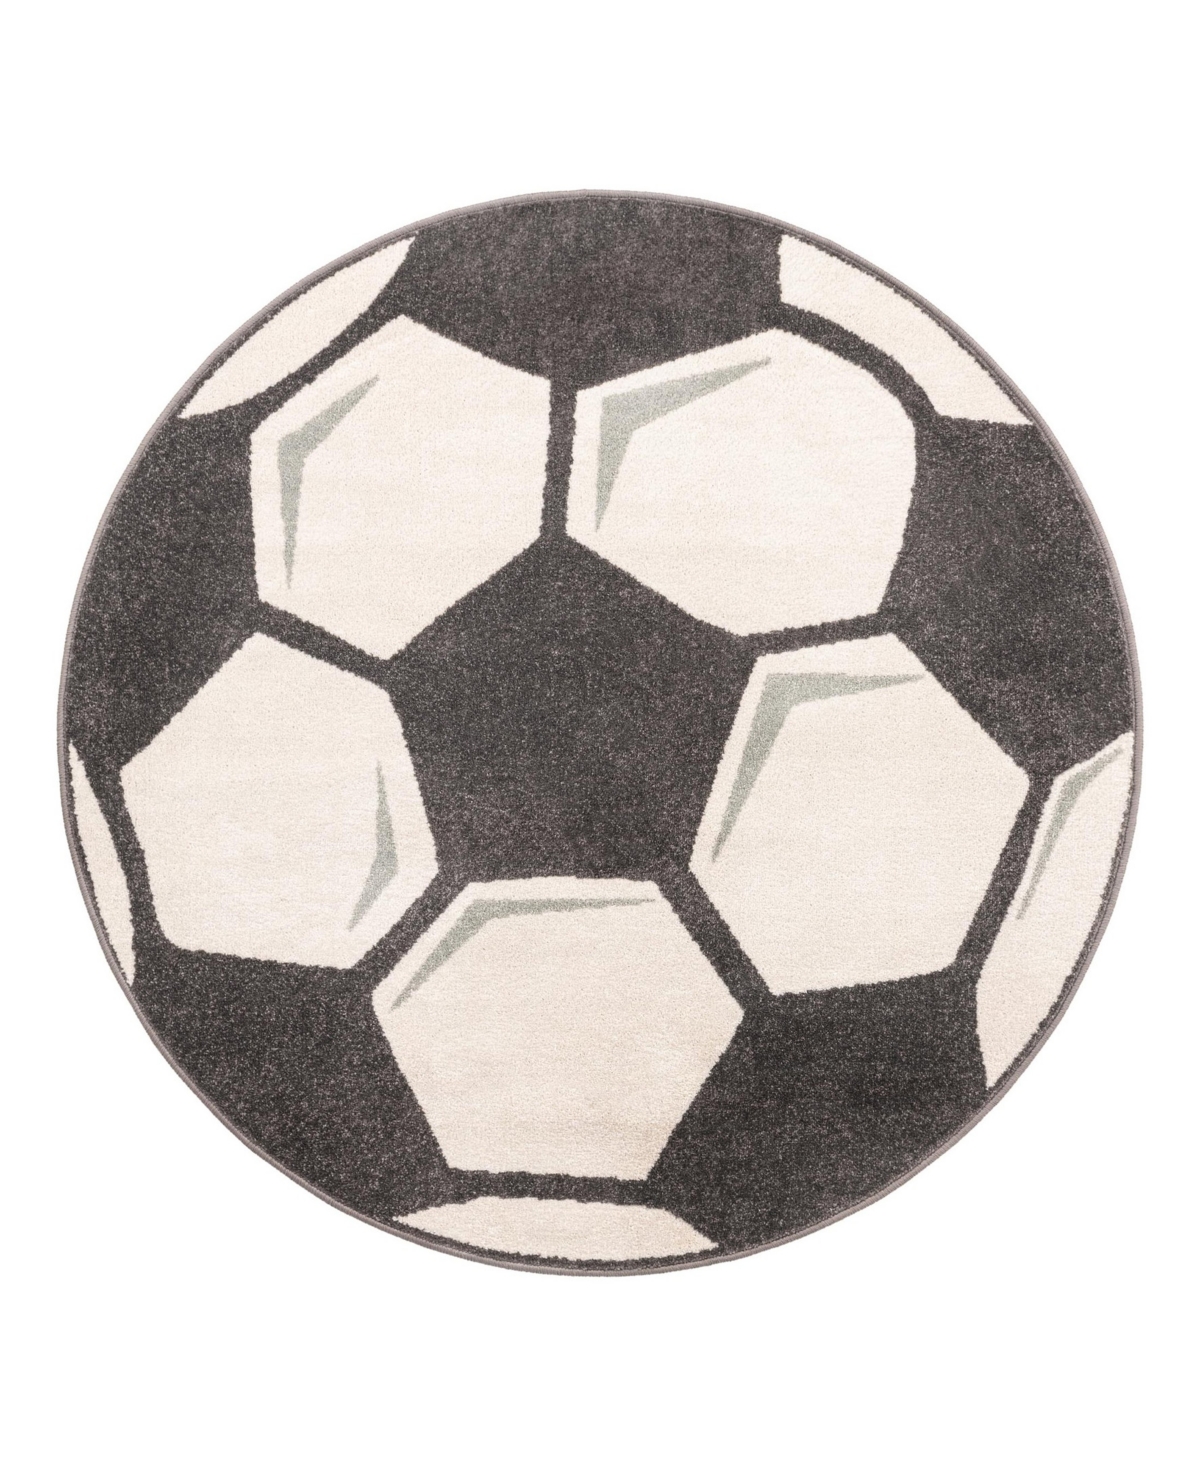 Bayshore Home Campy Kids Soccer Ball 5'3" X 5'3" Round Area Rug In Black